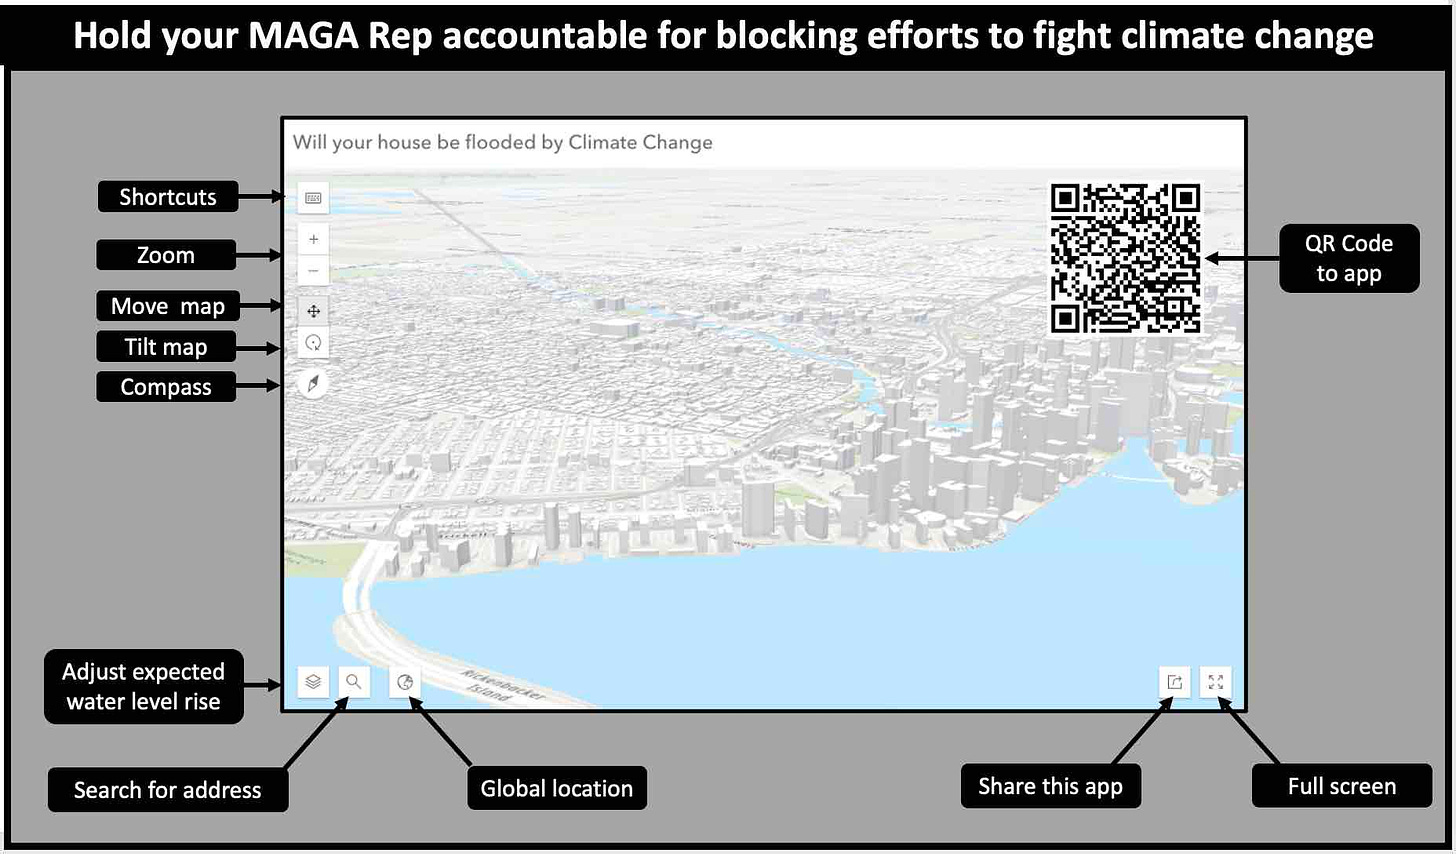 How to use this app to assess your risk from flooding as sea levels rise due to Climate Change